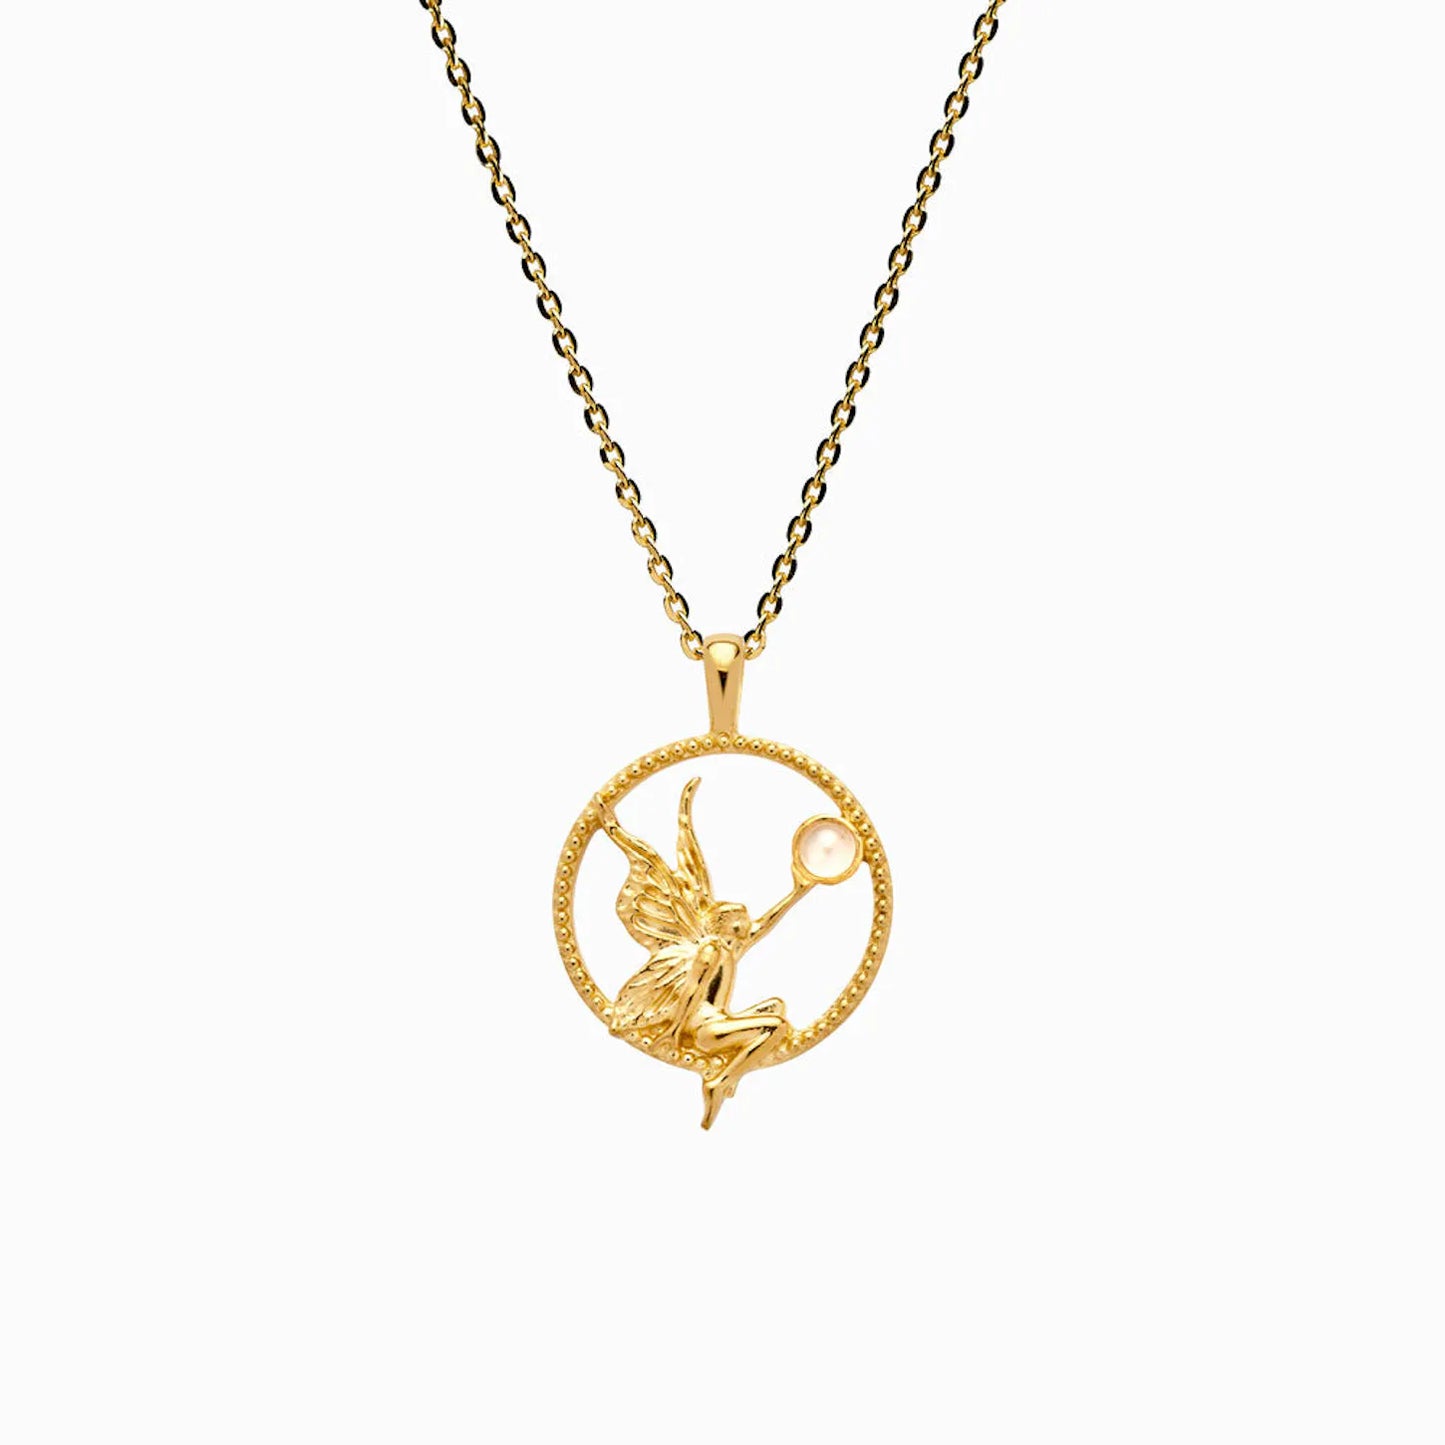 AWE Inspired Nymph Necklace